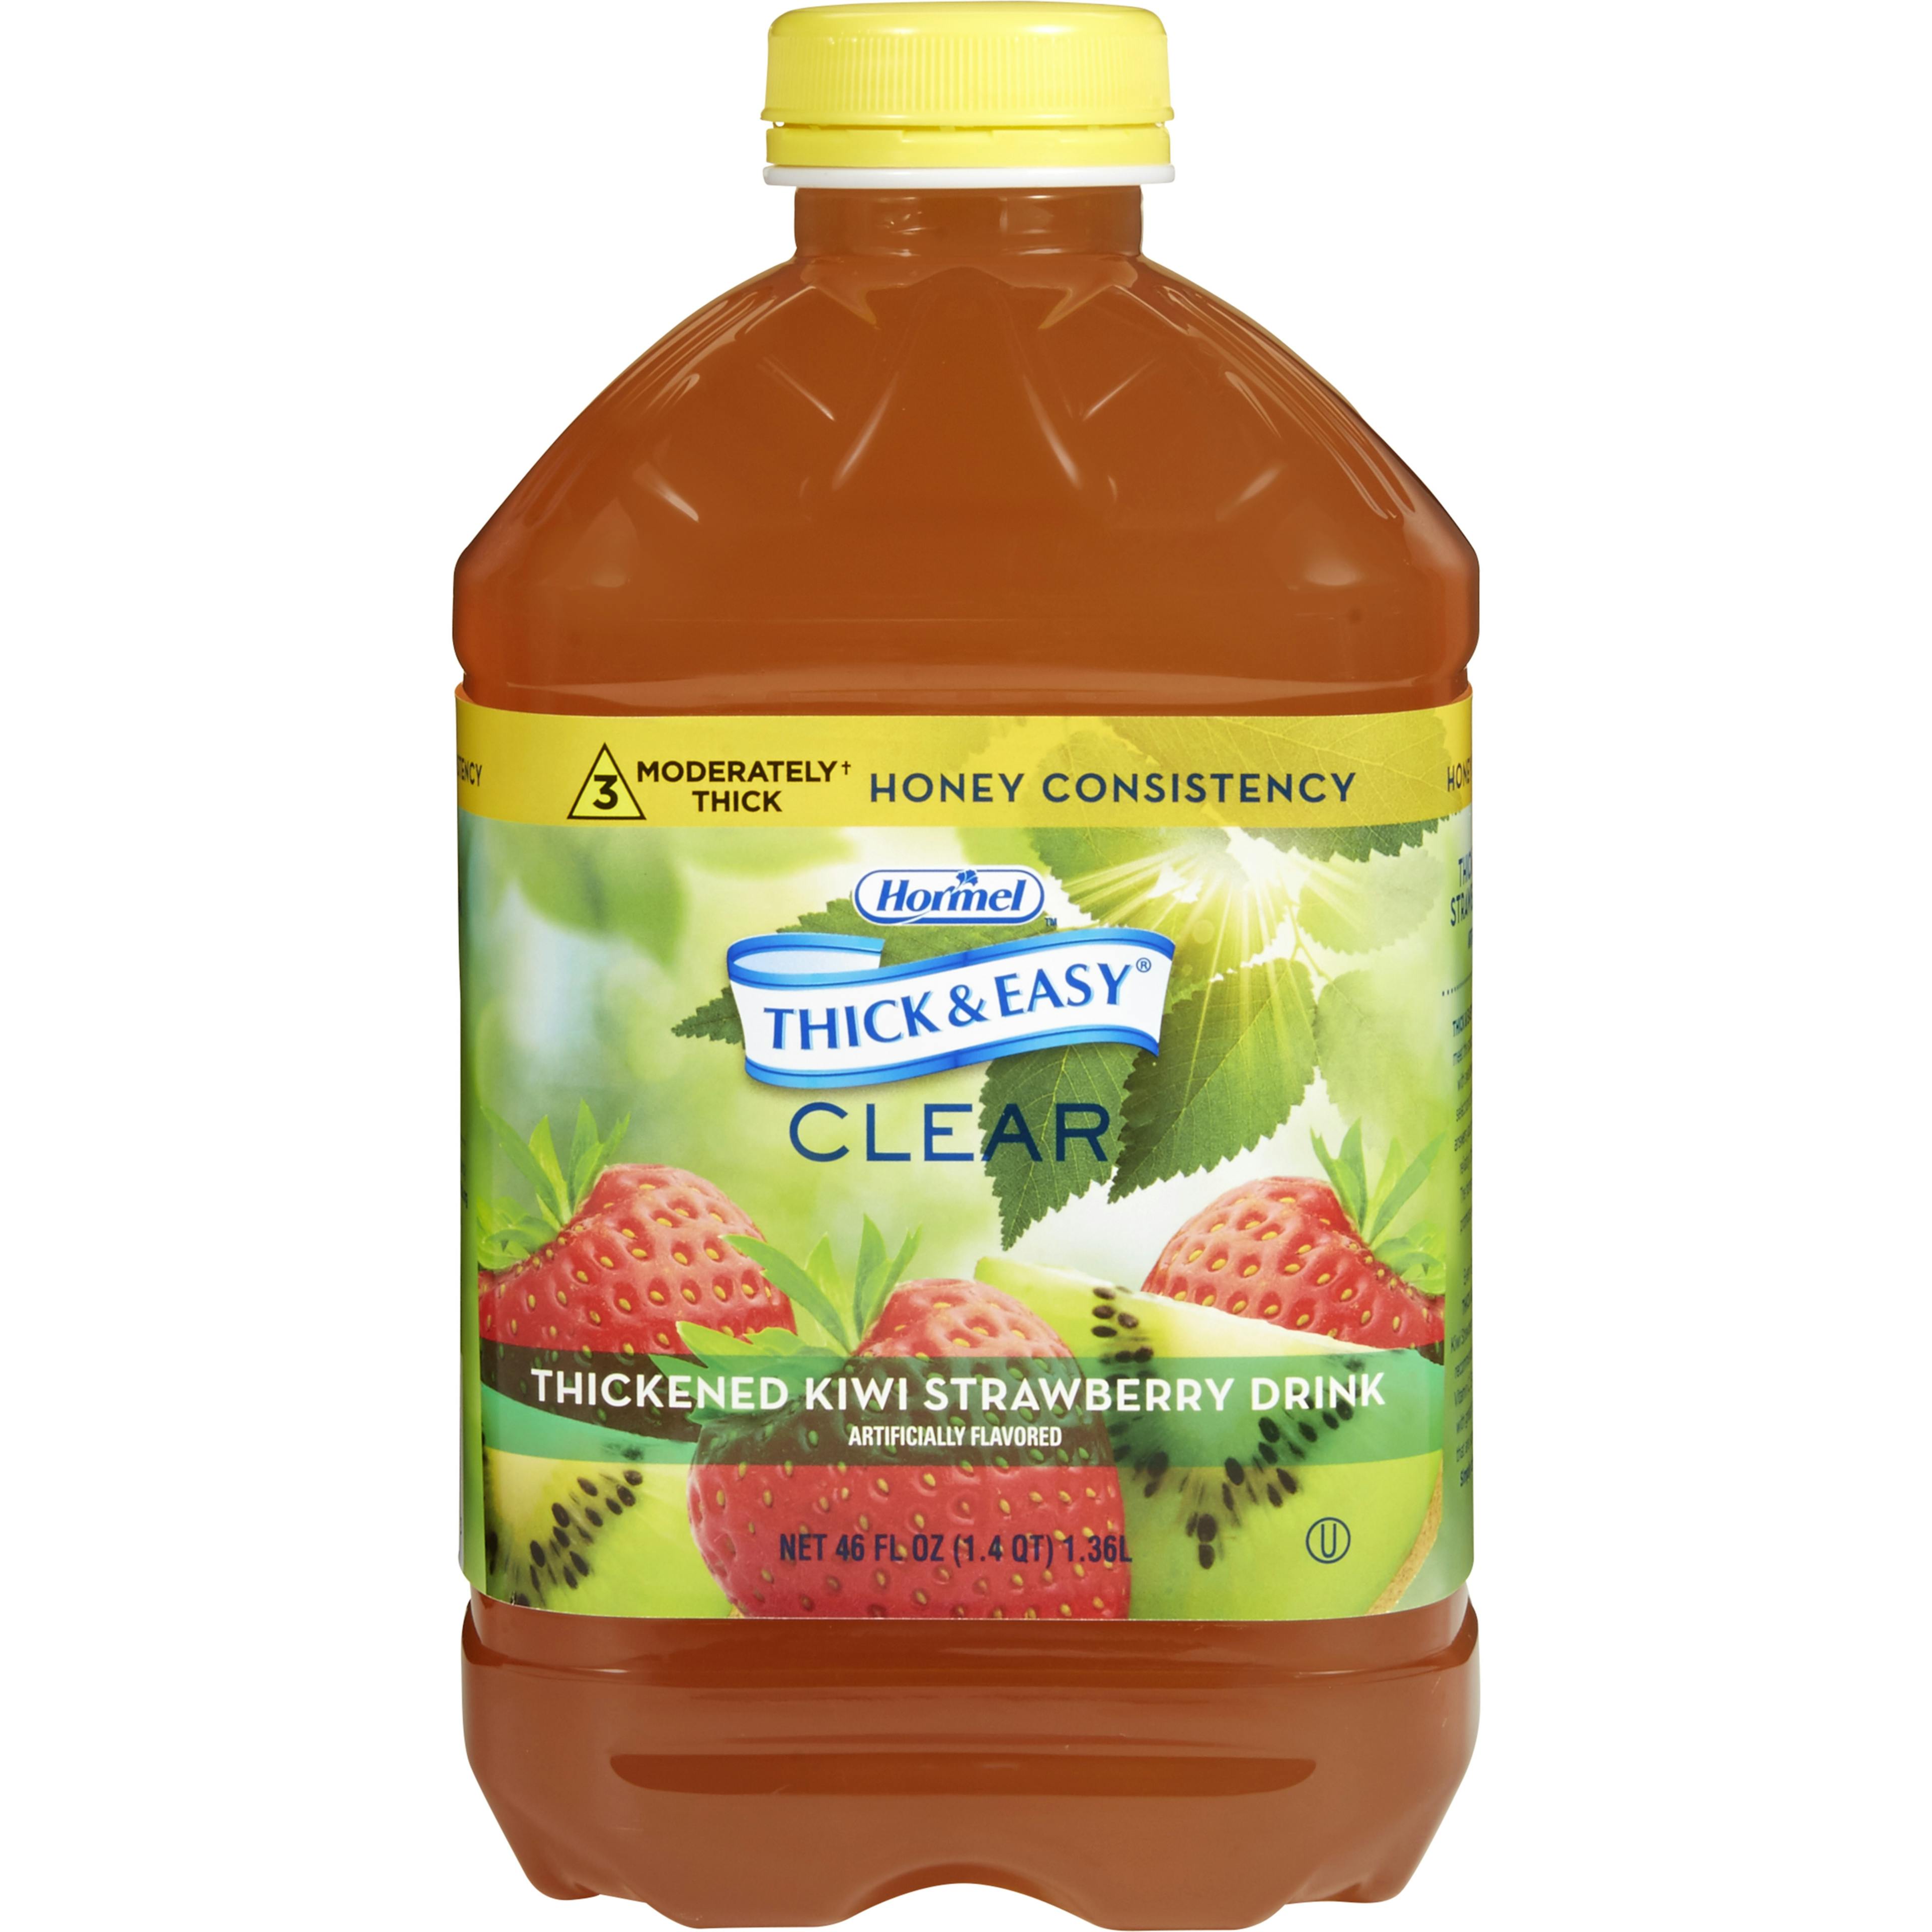 Thick & Easy Clear Honey Consistency Kiwi Strawberry Thickened Beverage, 46 oz. Bottle, 11840, Case of 6